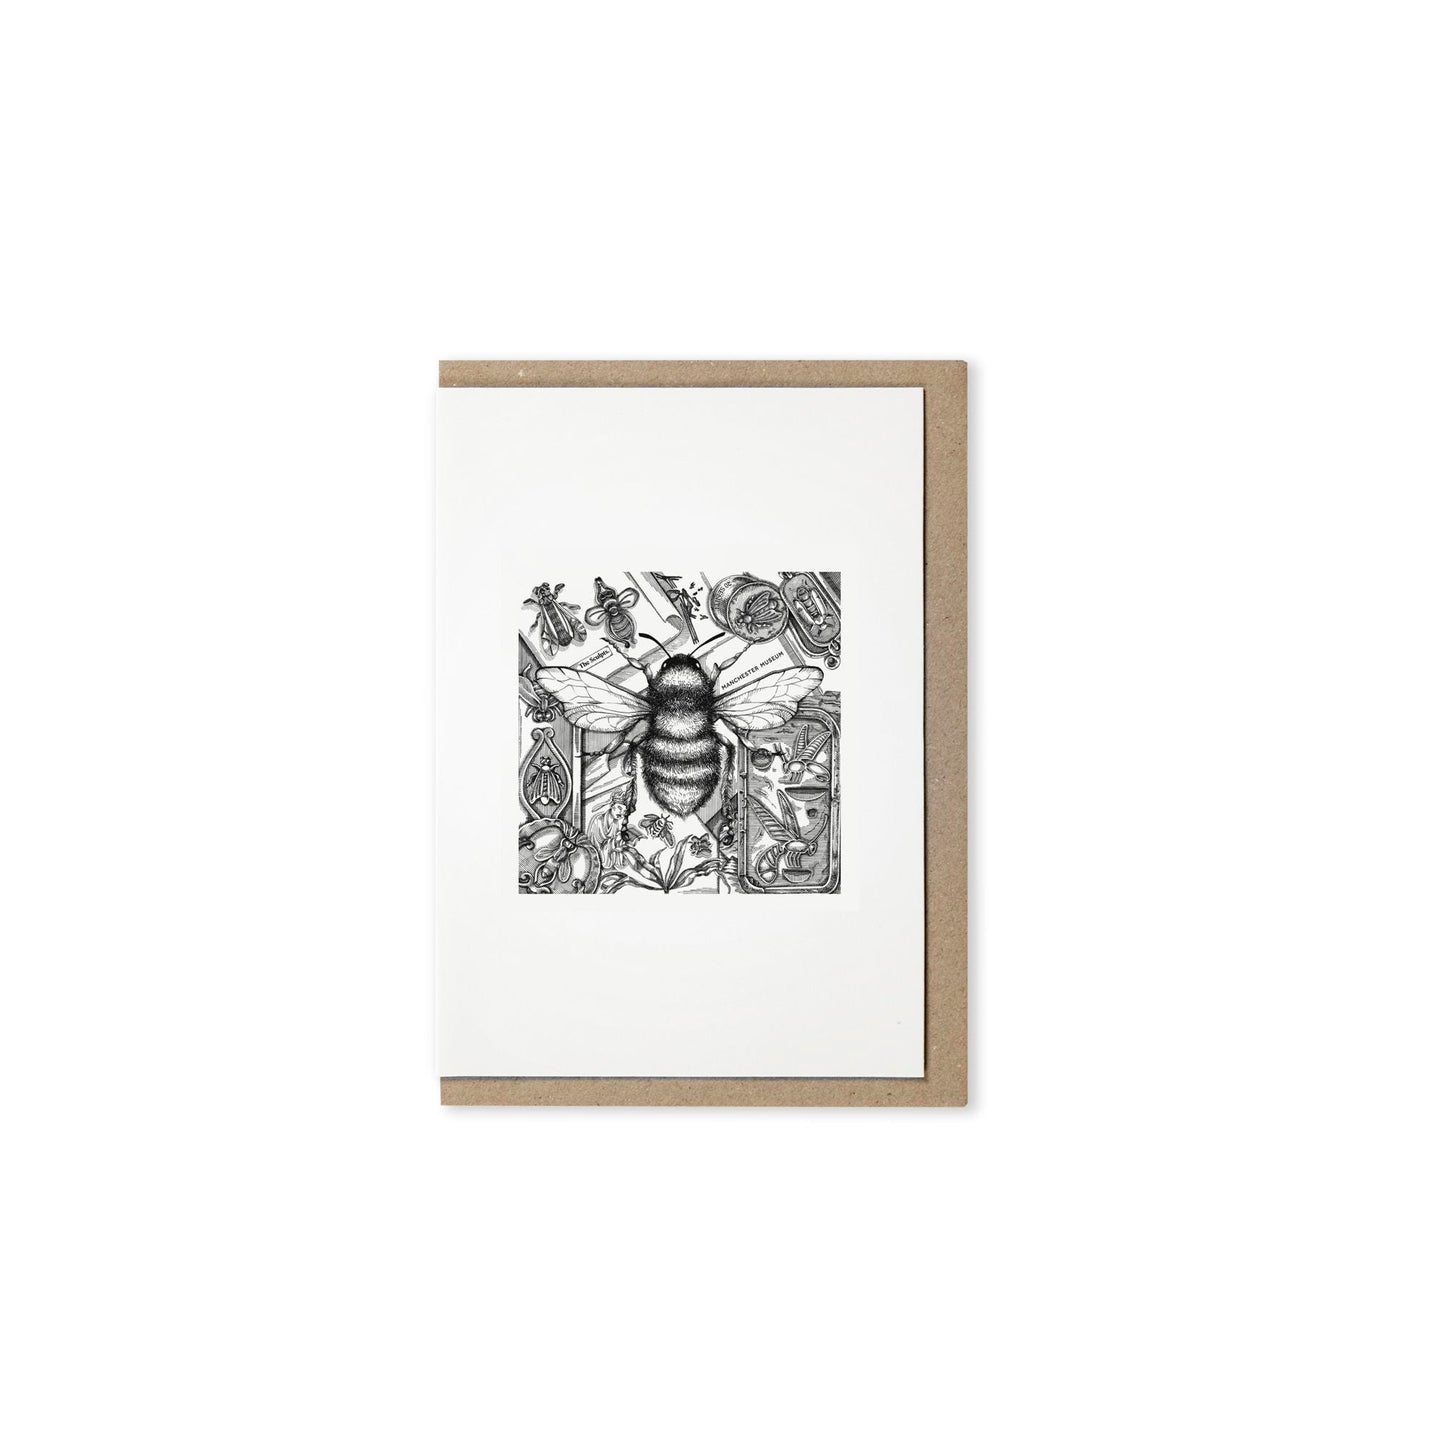 Museum bespoke bee design on a white card with a kraft paper envelope behind it.